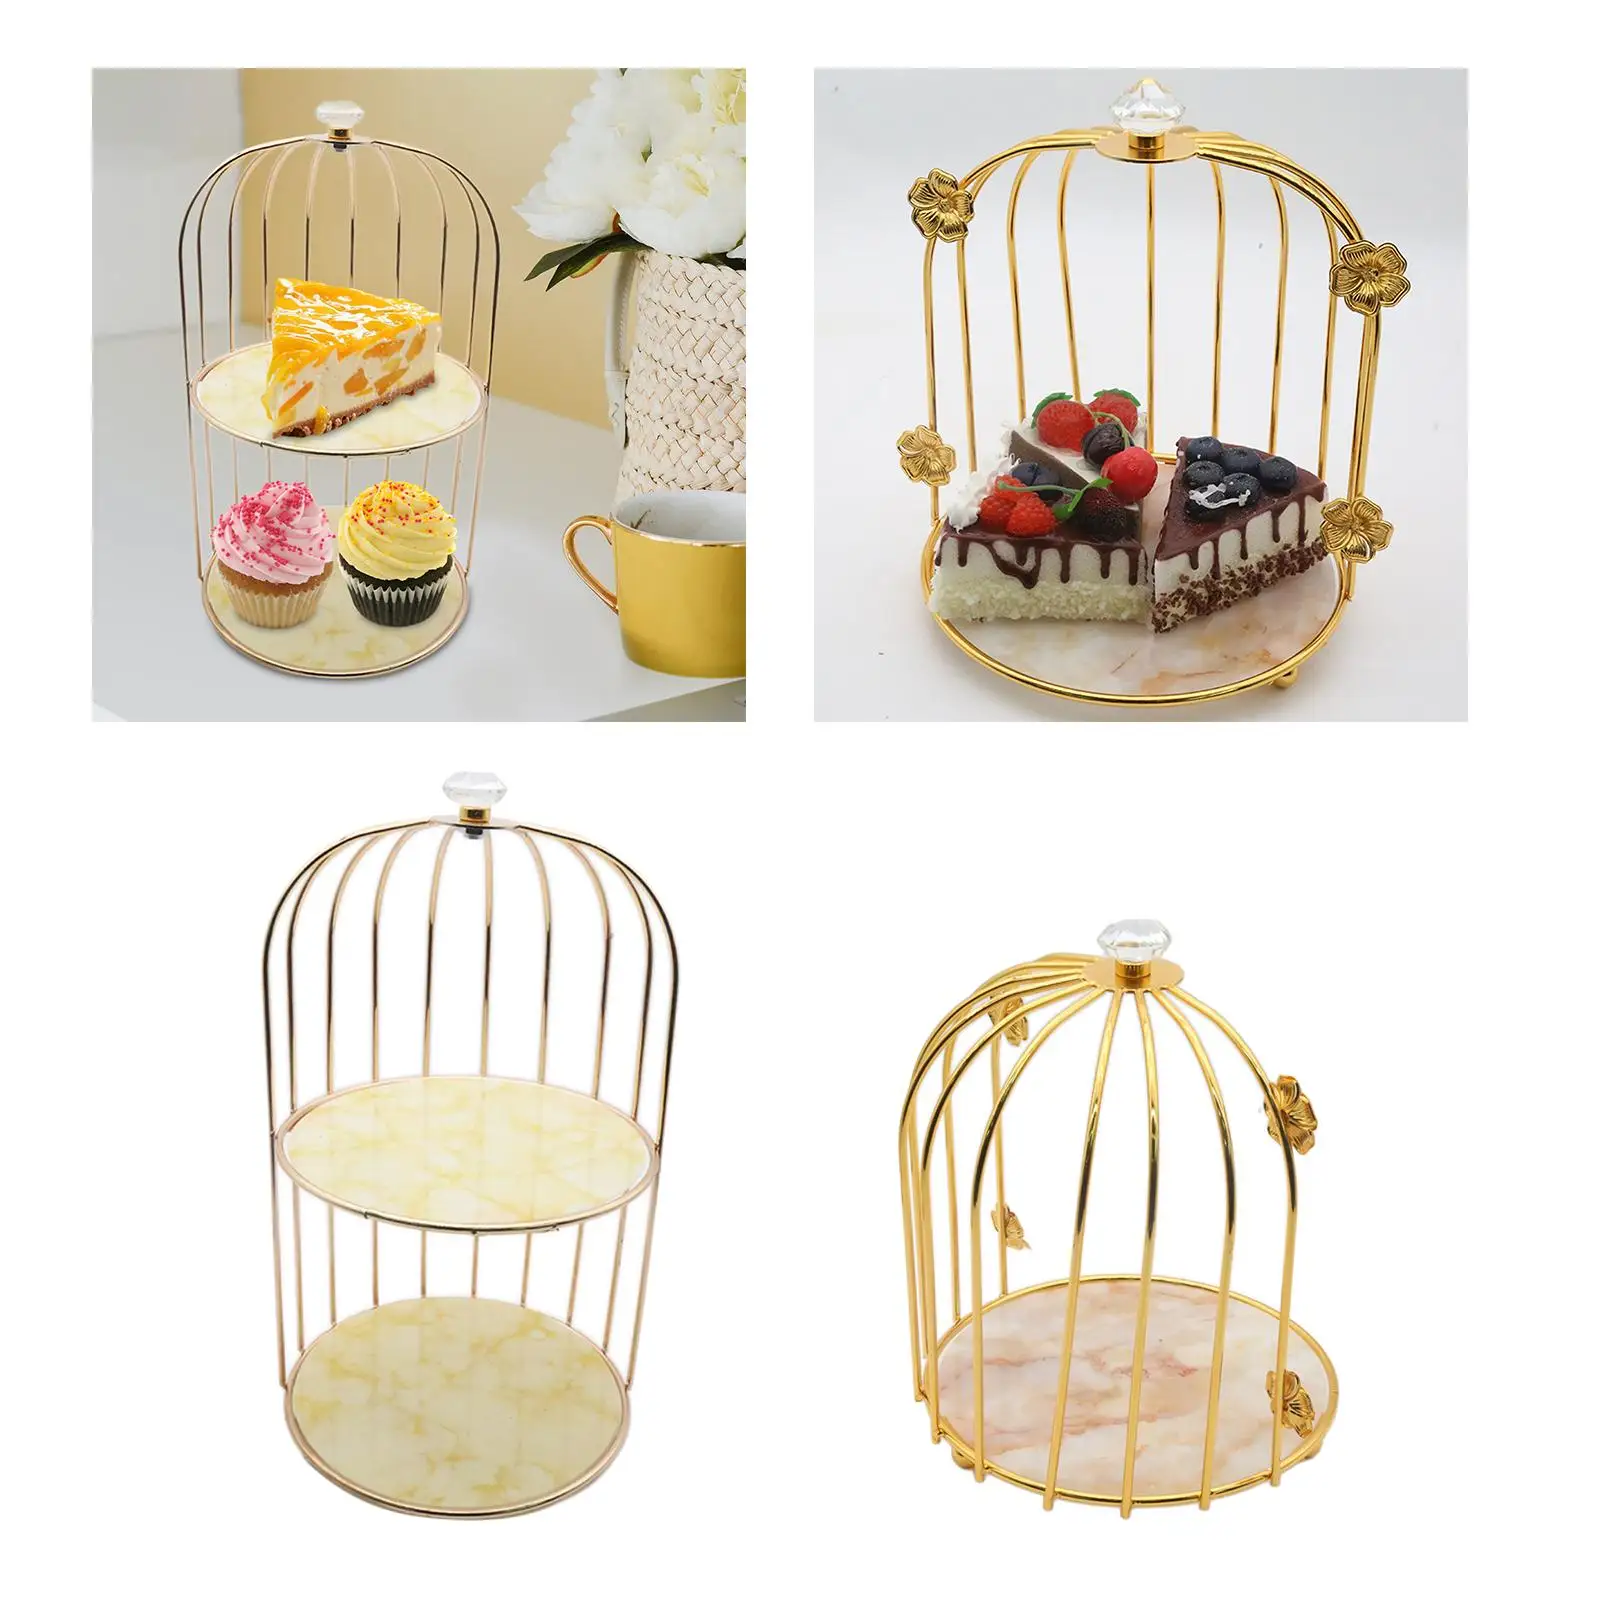 Metal Bird Cage Makeup Organizer Perfume Lipstick Cupcake Stand Holder Nordic Cosmetic Rack for Bedroom Home Dresser Decoration